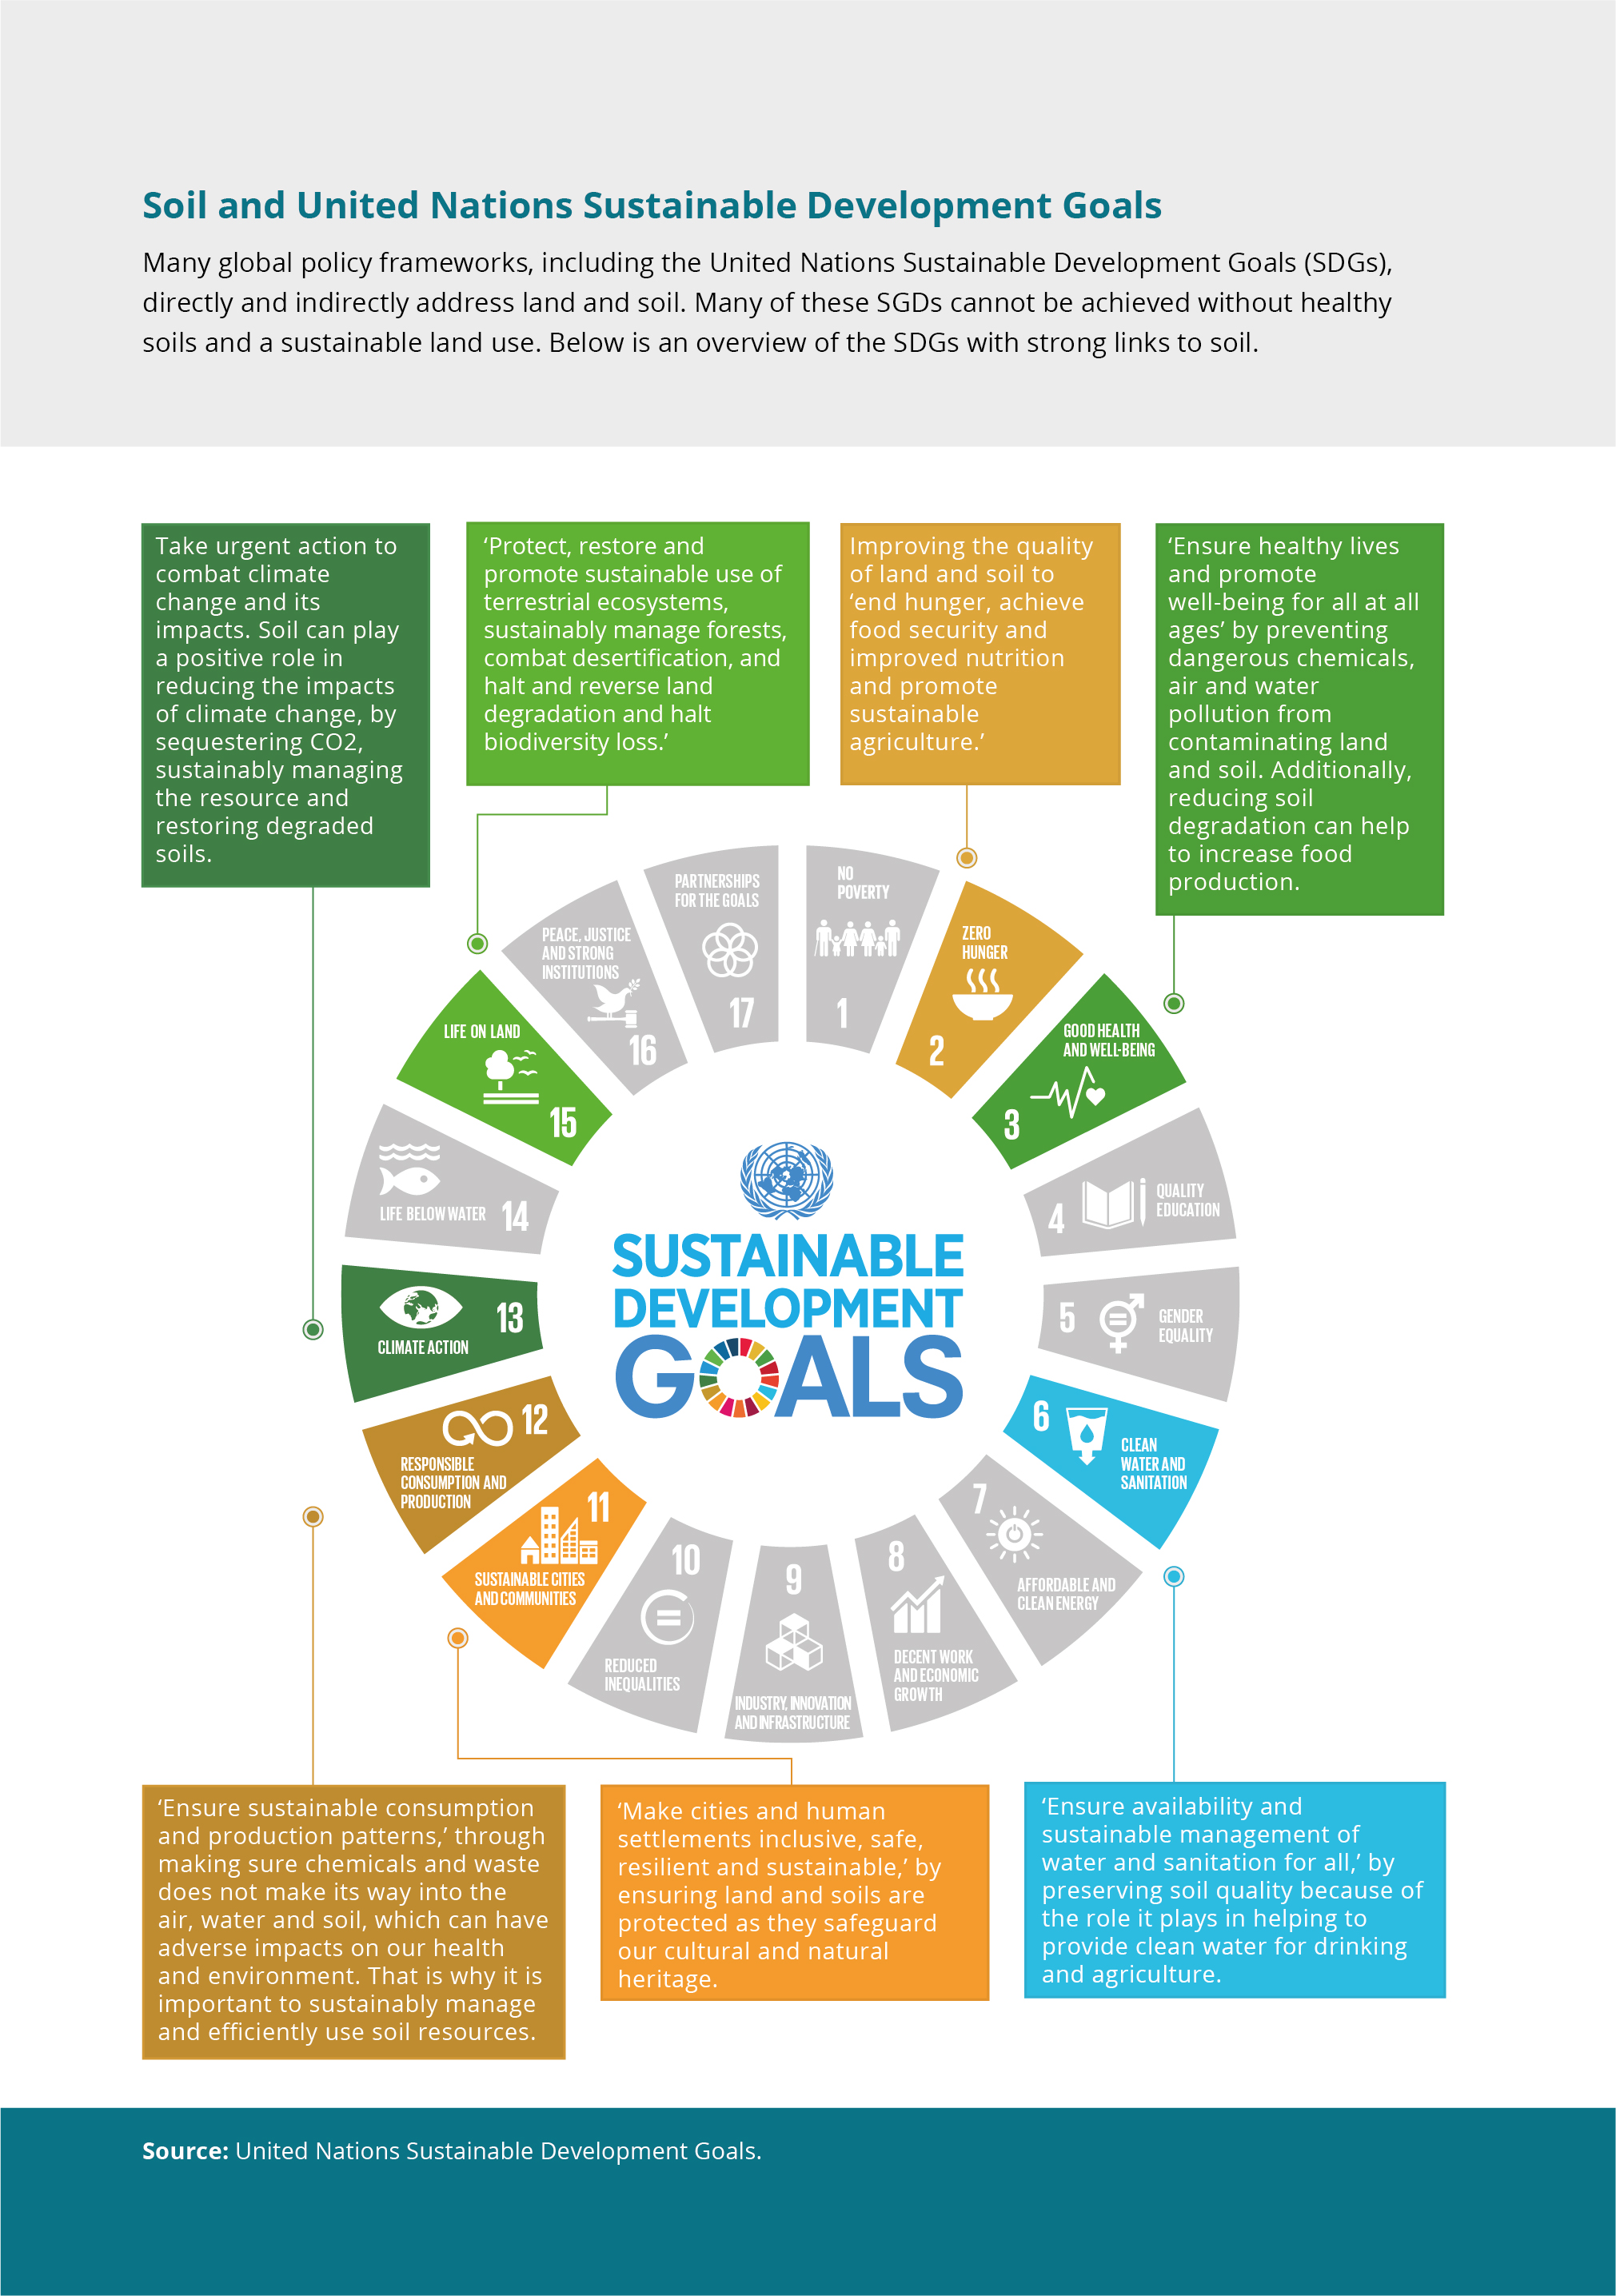 Many global policy frameworks, including the United Nations Sustainable Development Goals (SDGs),directly and indirectly address land and soil. Many of these SGDs cannot be achieved without healthysoils and a sustainable land use. Below is an overview of the SDGs with strong links to soil.